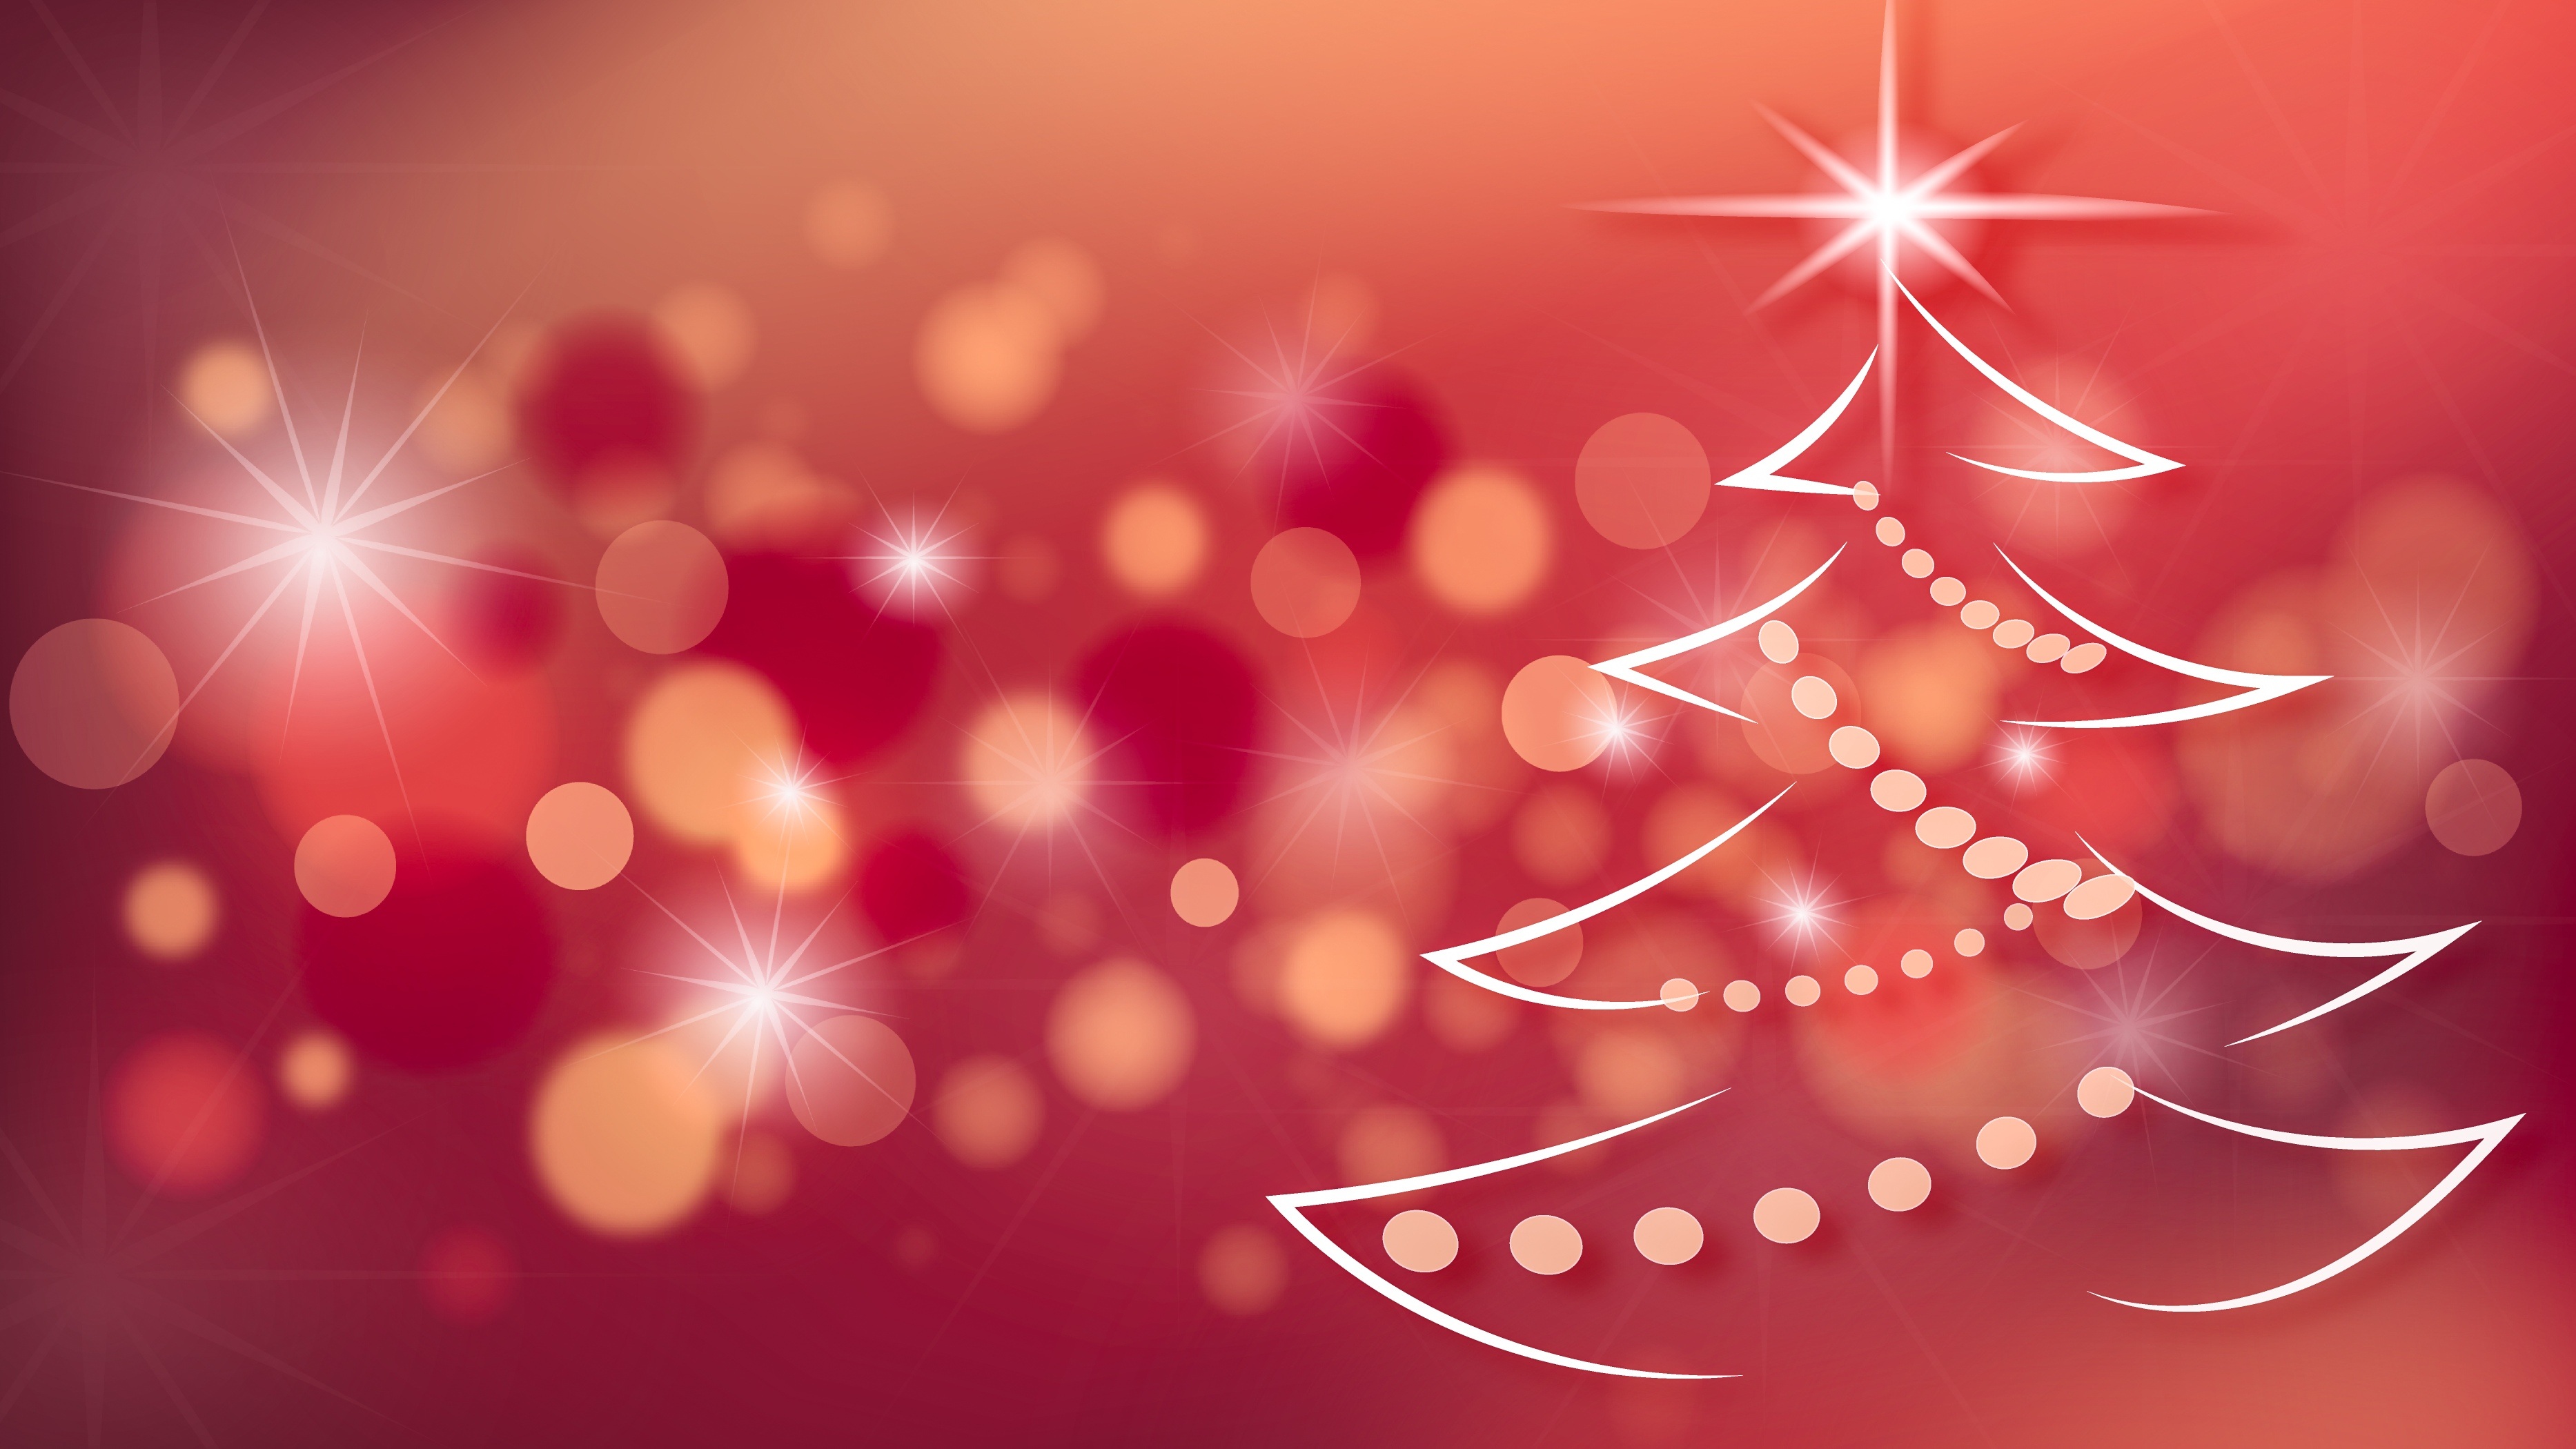 Background christmas tree red banner drawing free image download